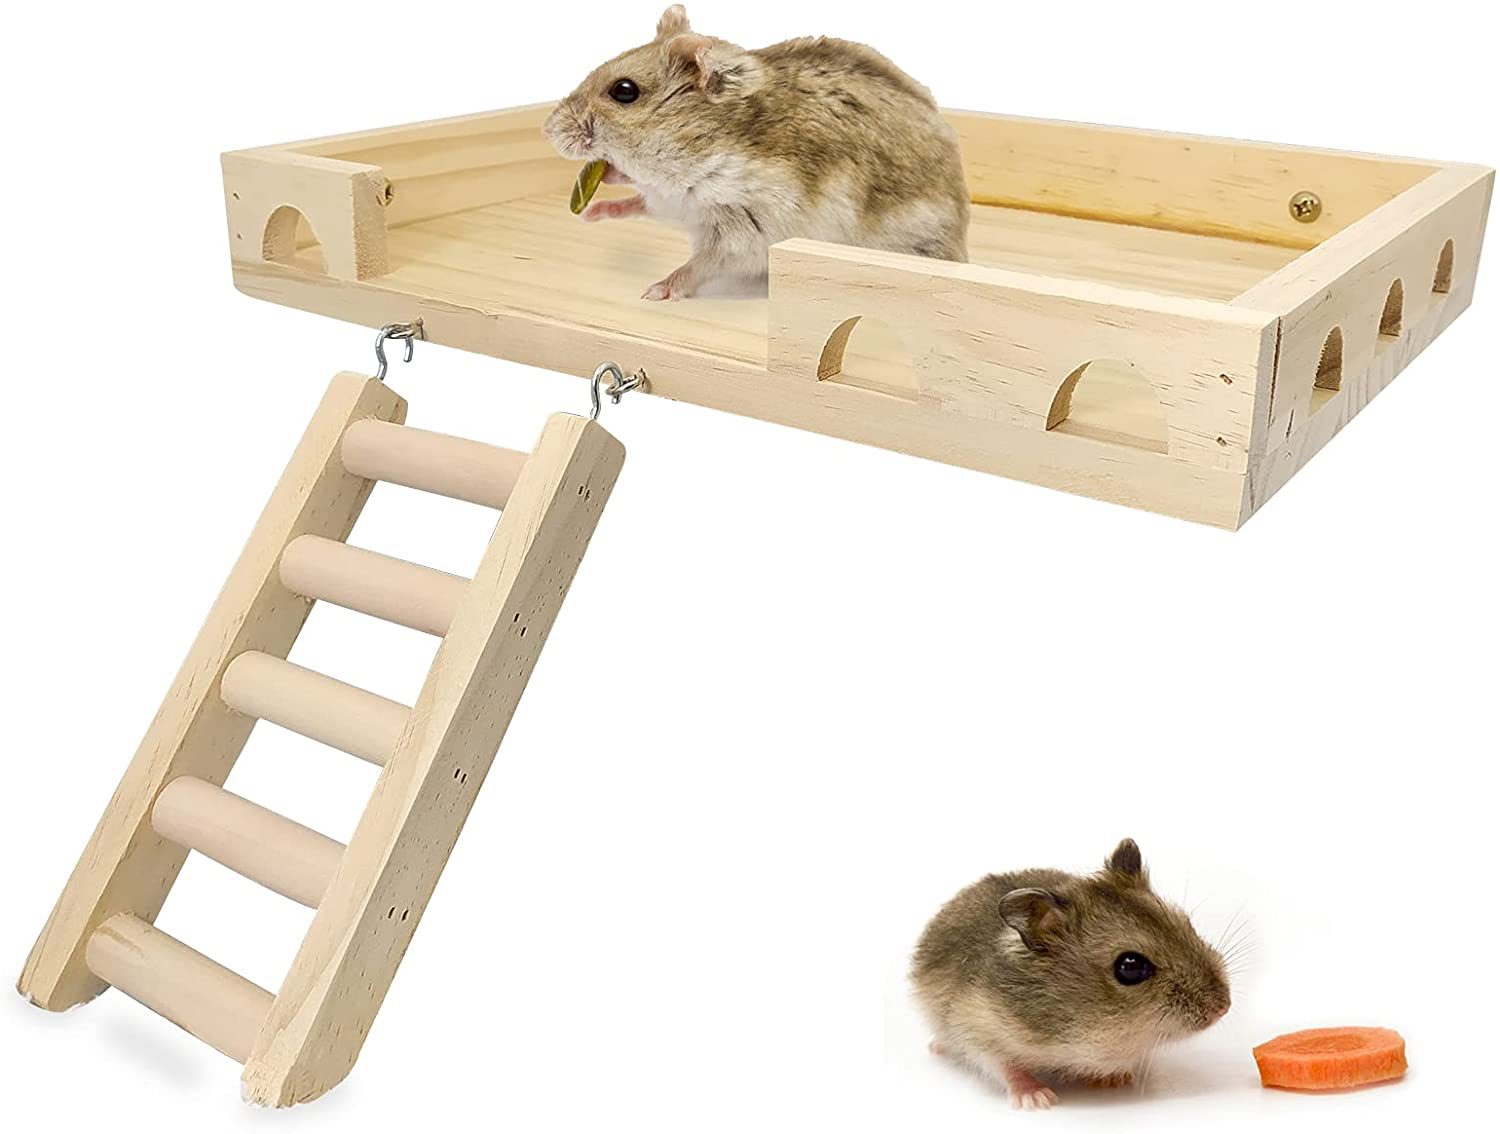 RABBITP Wood Bird Perch-Toys and Accessories for Parrot, Parakeet, Syrian Hamster, Ferret, Chinchilla, Guinea Pig-Hamster Play Stand Platform with Ladder… Animals & Pet Supplies > Pet Supplies > Bird Supplies > Bird Cage Accessories RABBITP L  